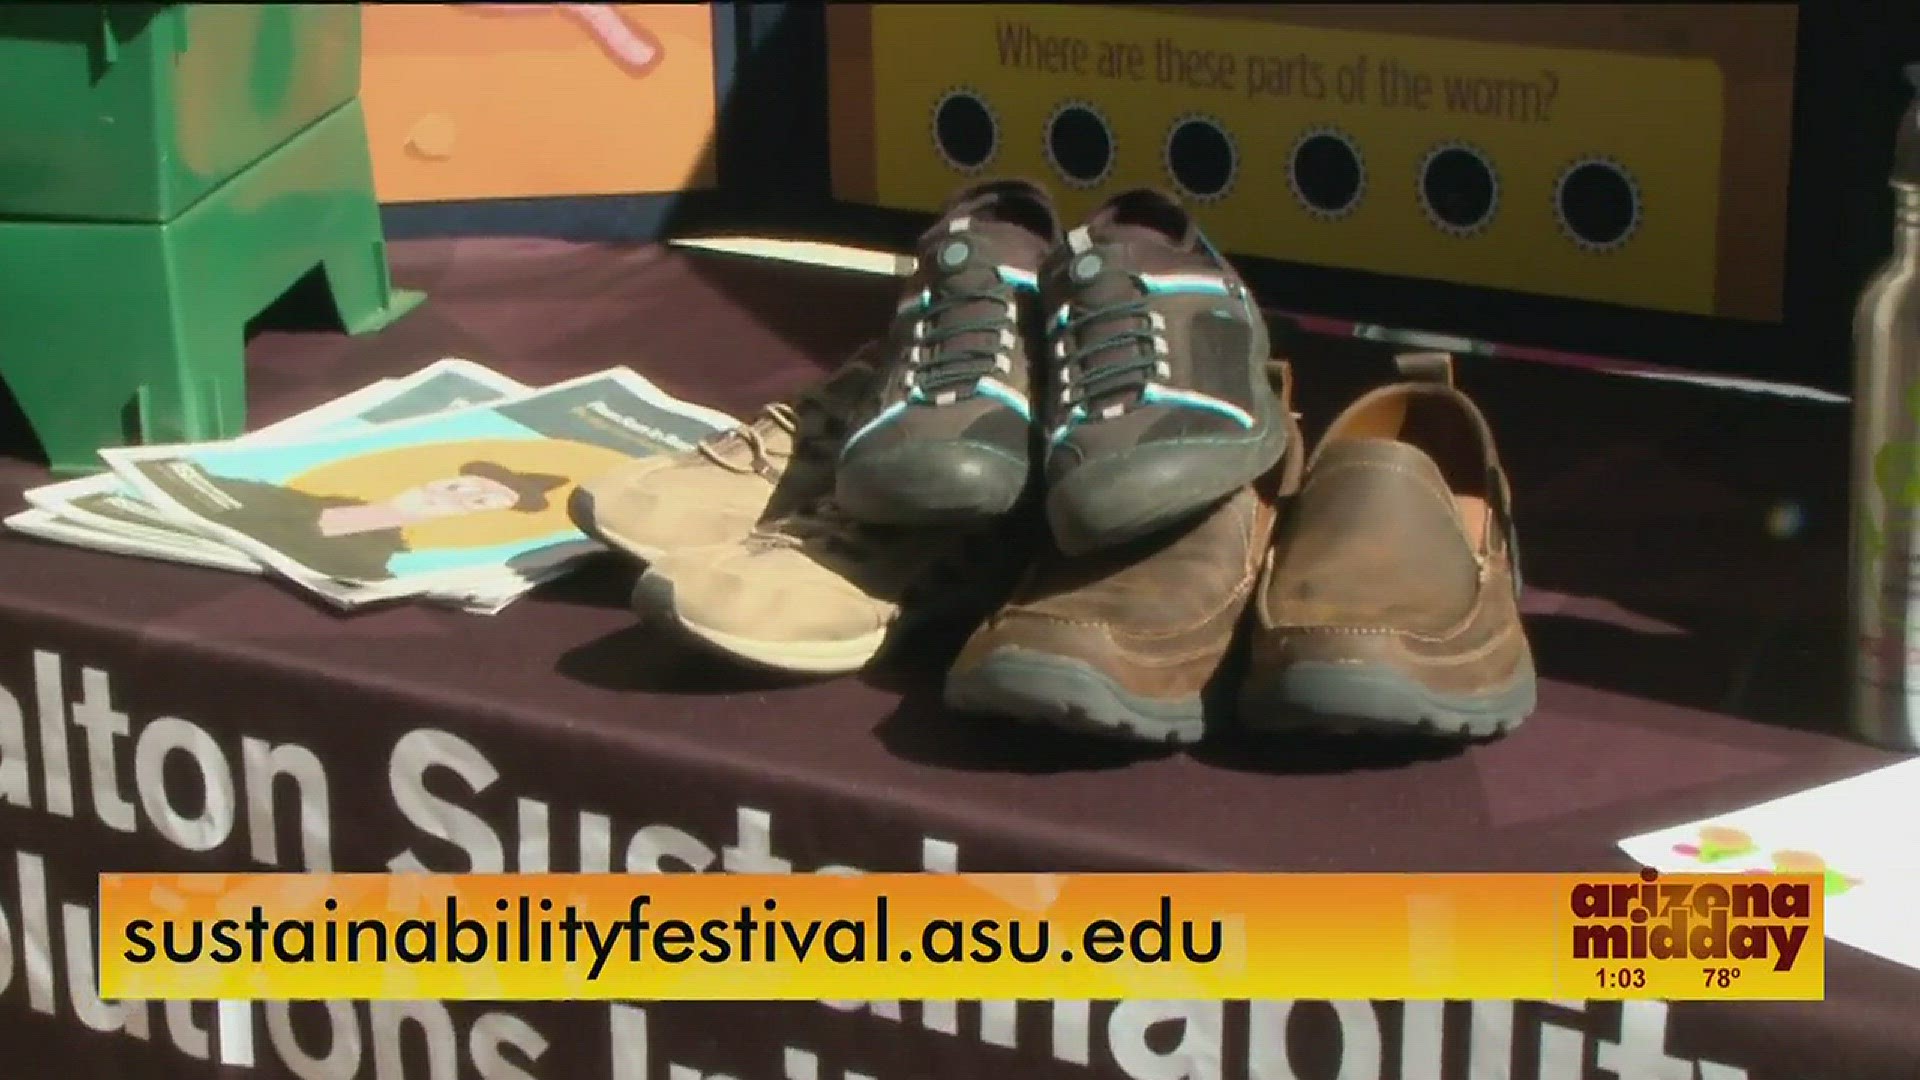 ASU and the City of Phoenix are teaming up to bring the Sustainability Solutions Festival at the ASU Night of the Open Door.